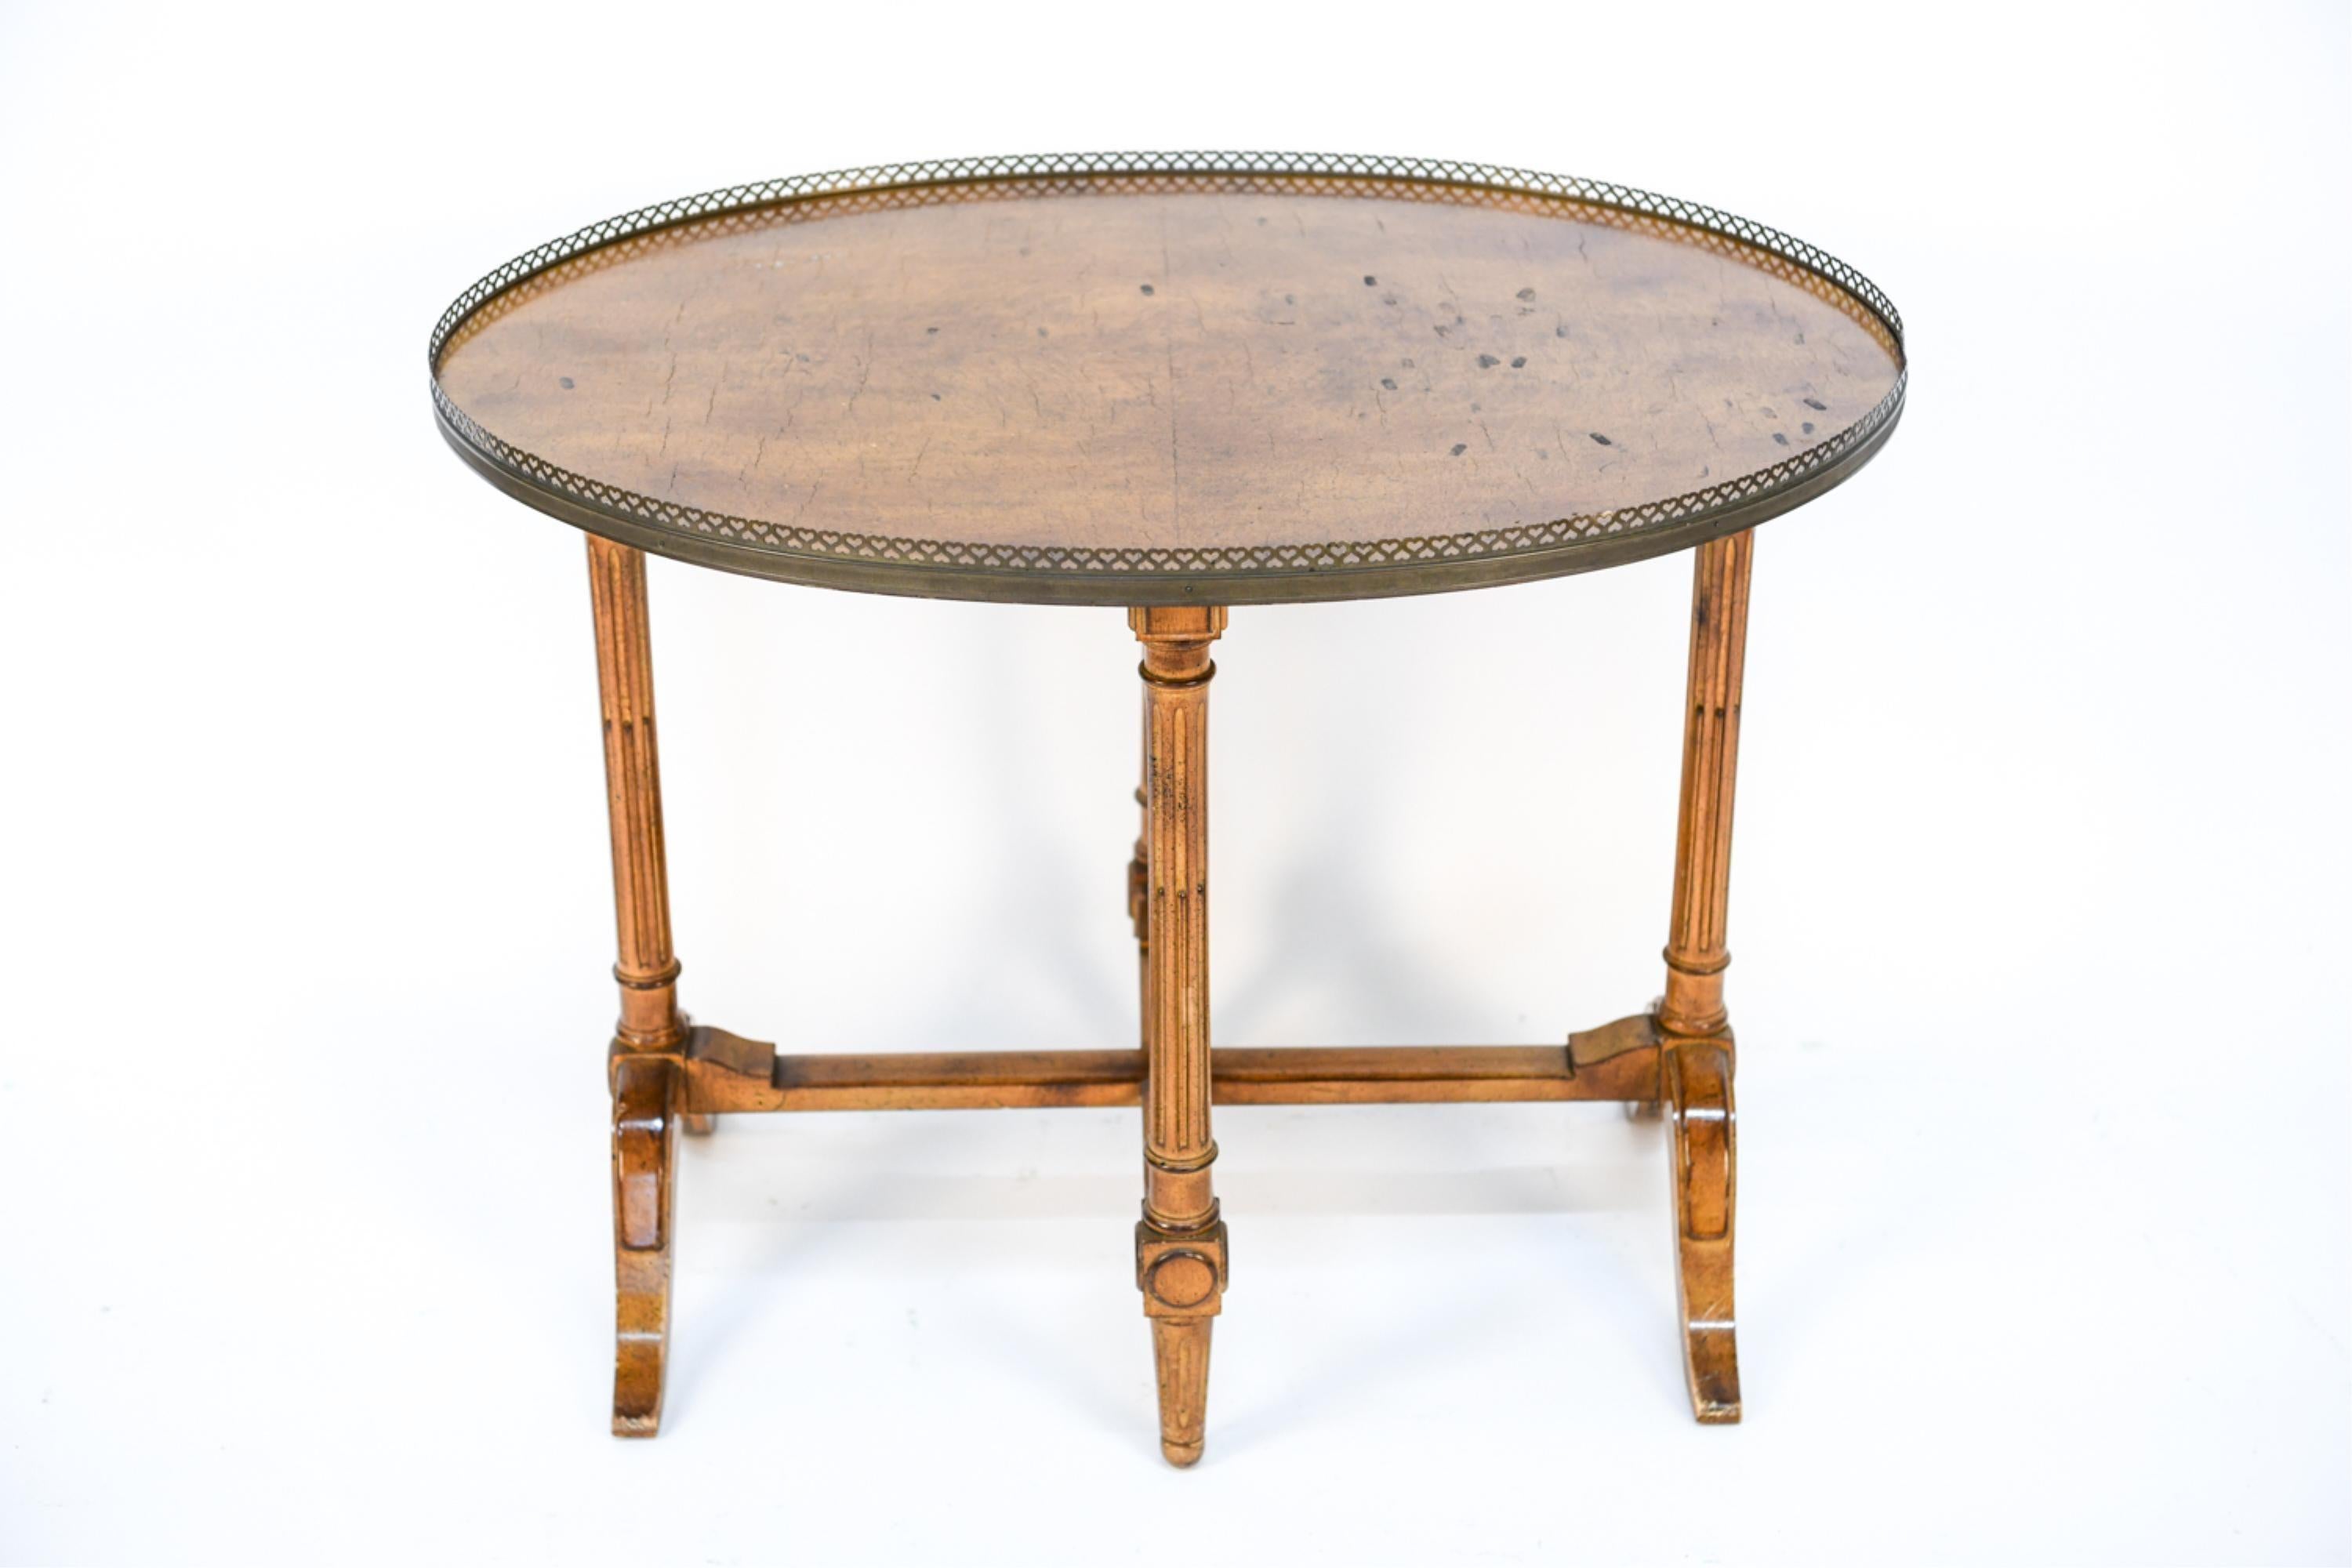 The stylish 19th century French table surrounded by a pierced brass gallery with elegantly carved trestled base legs with stretchers is the perfect size and height for an occasional tea table or distinct side or end table.
If you are in need of a